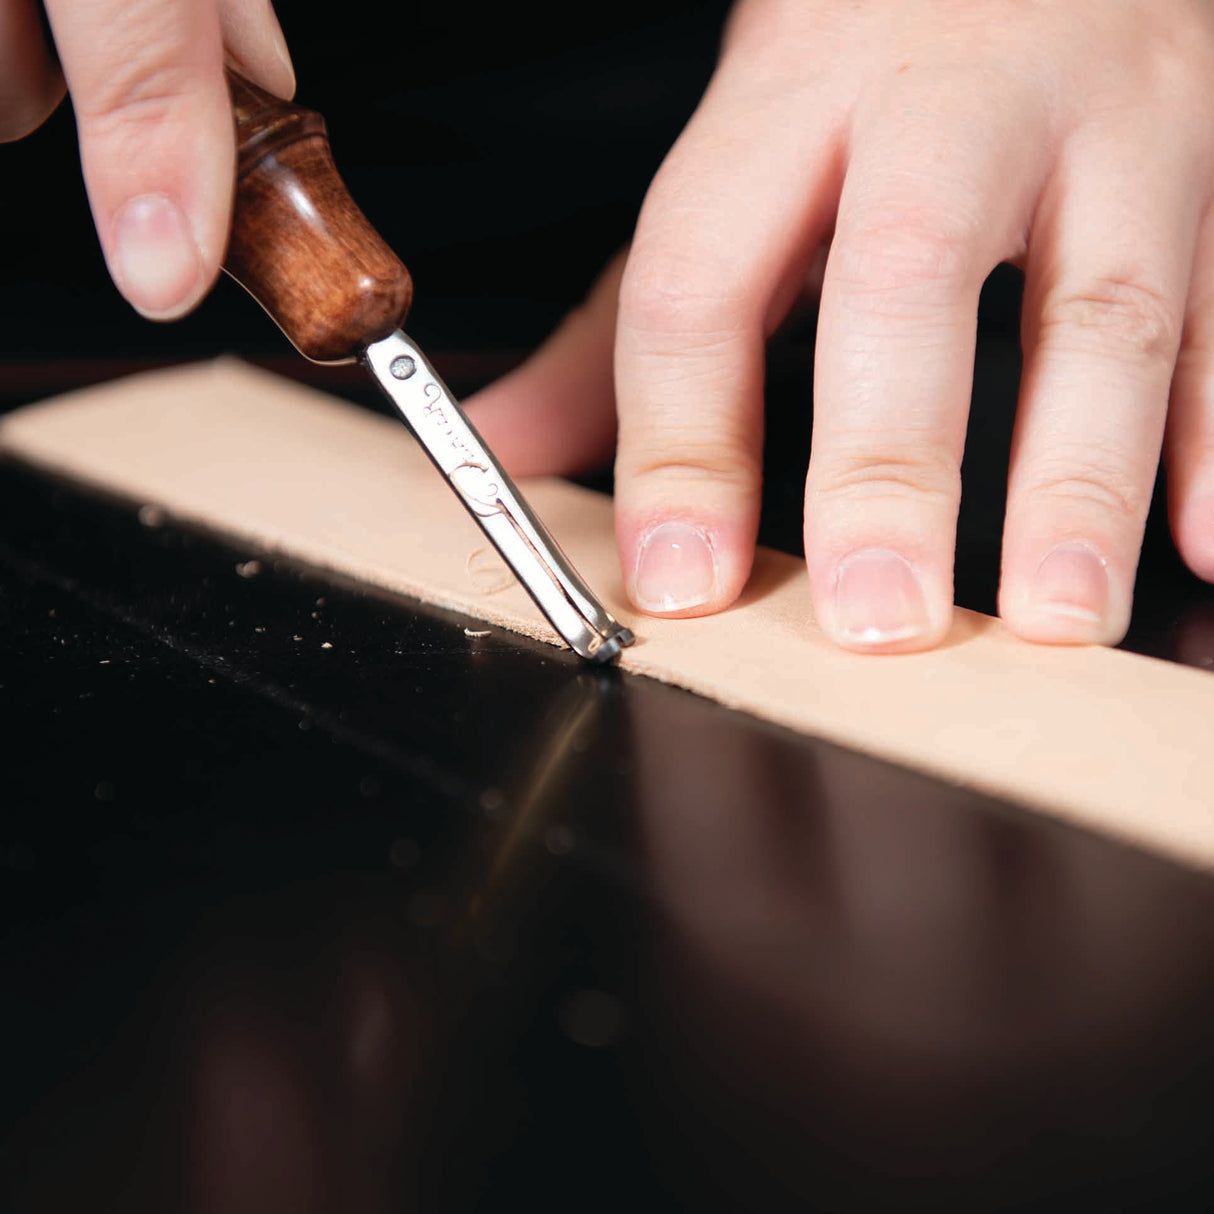 Leather Edge Beveler - Making Leather Goods Look Great